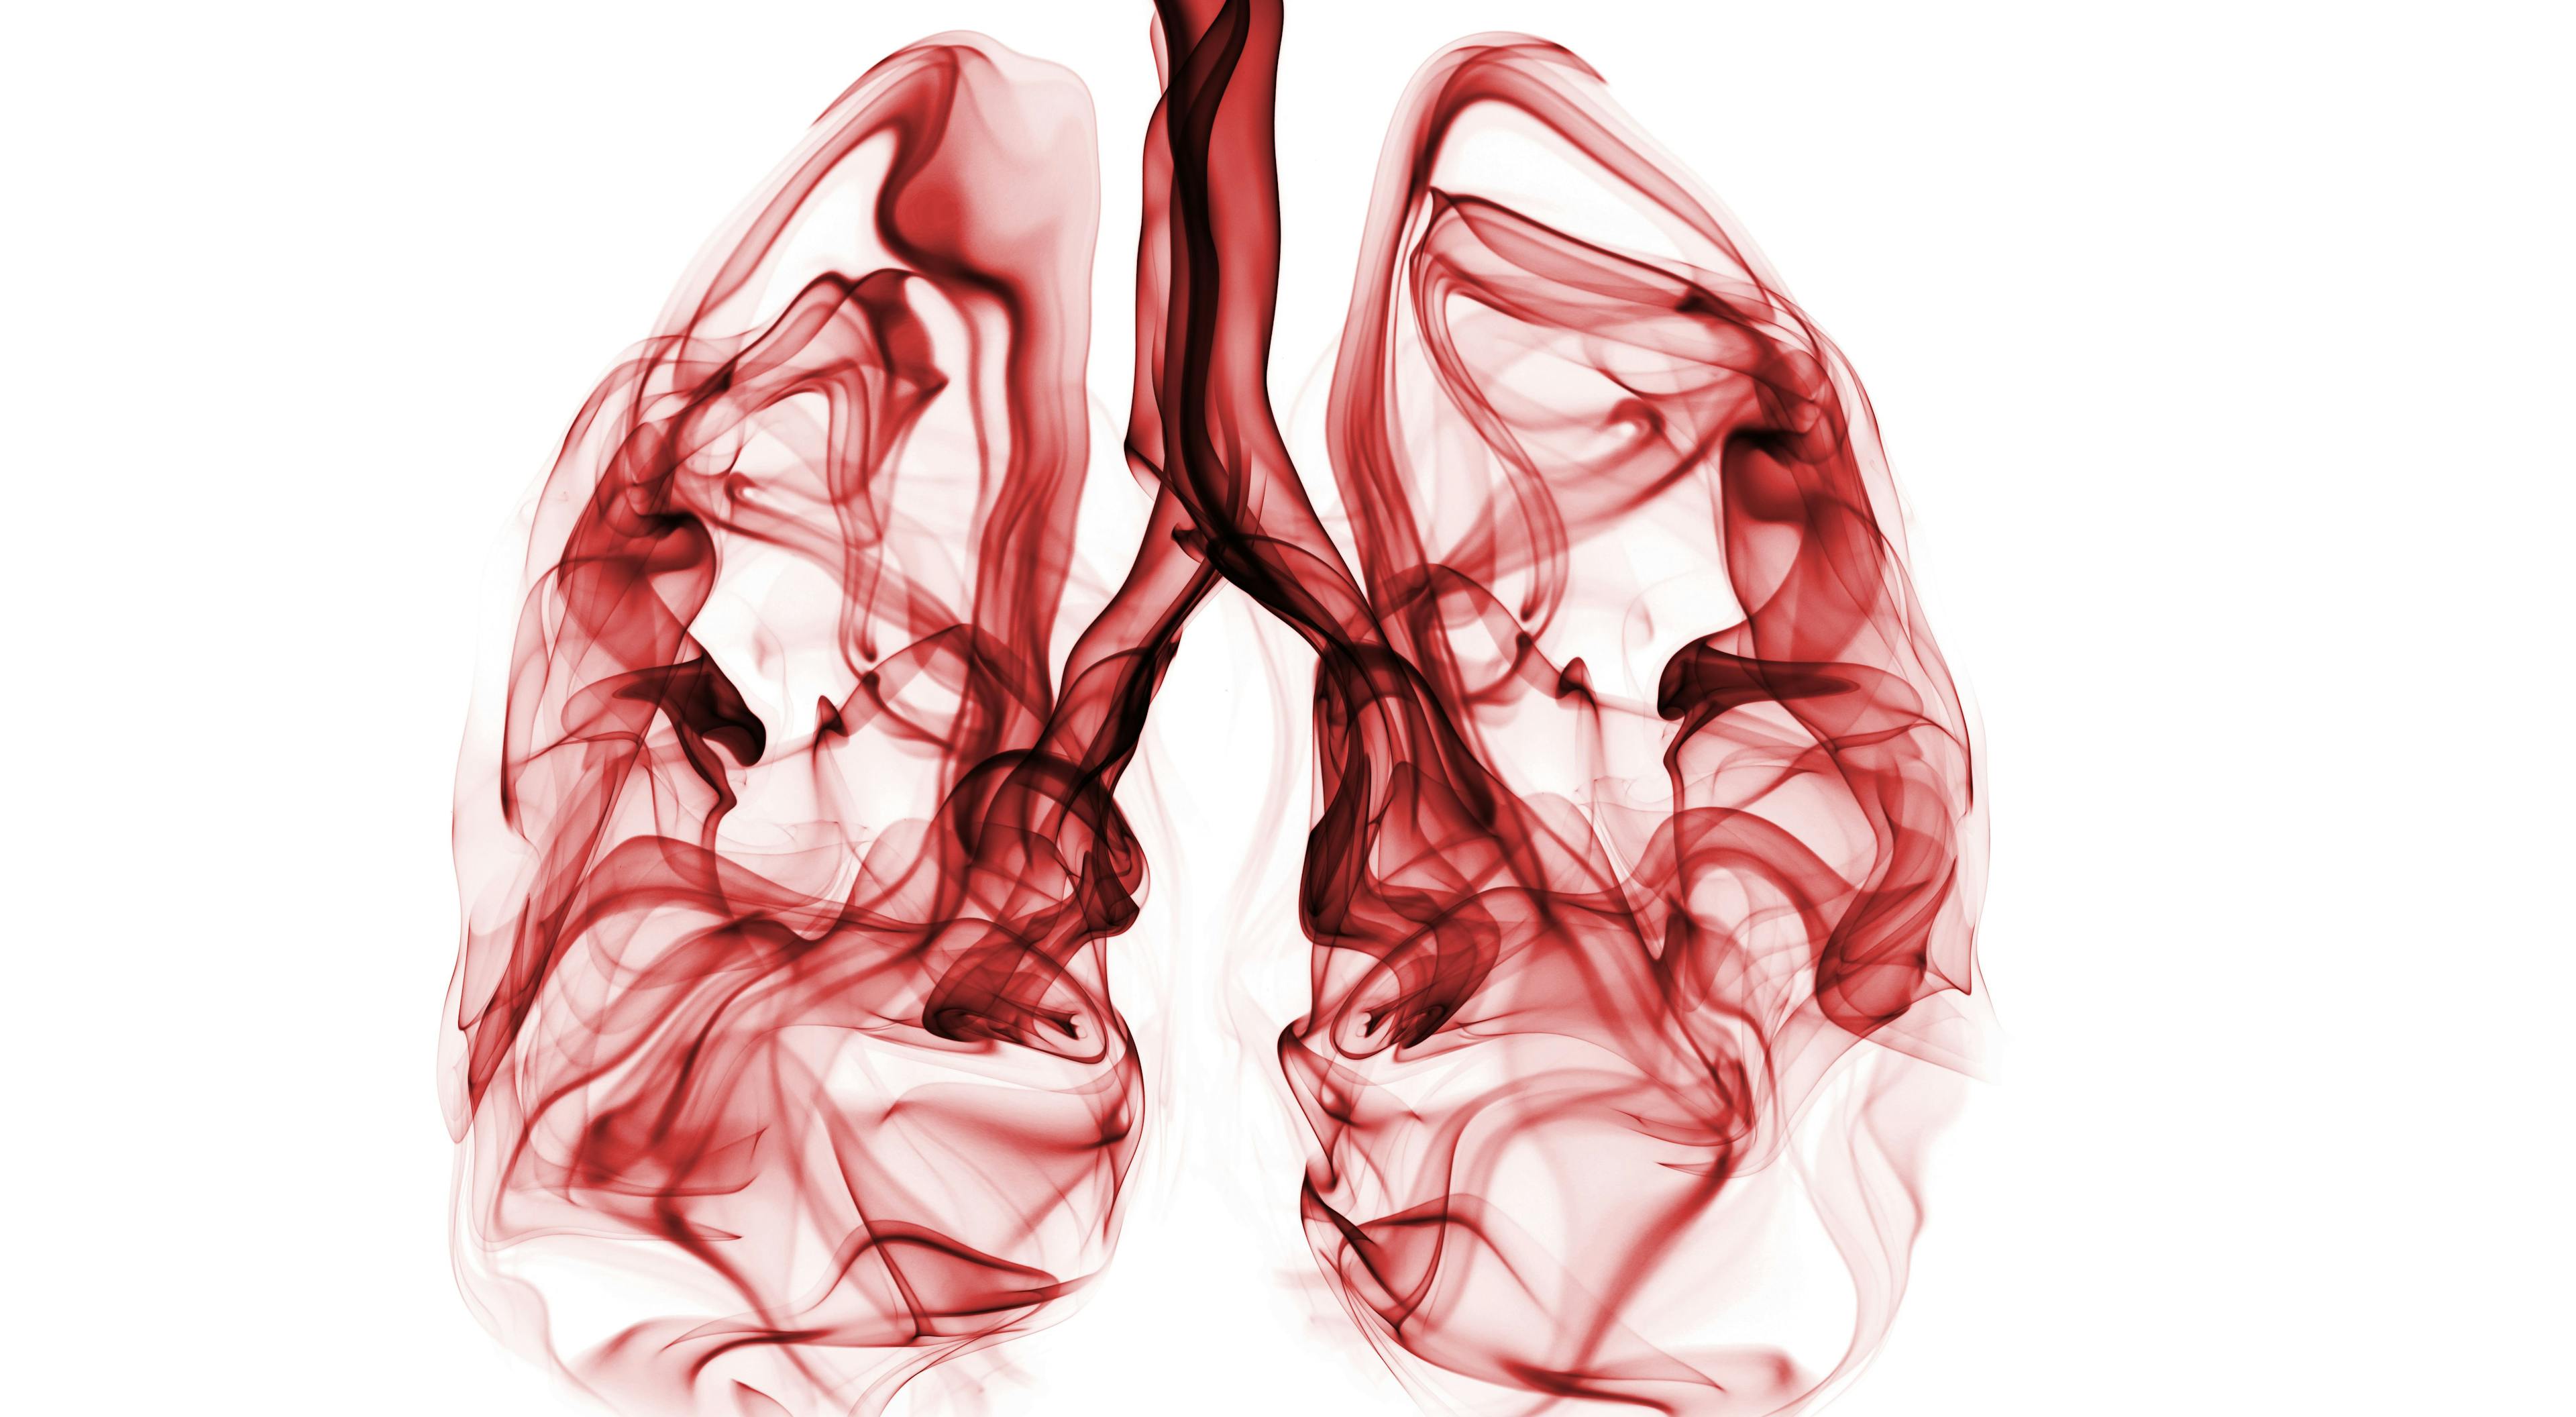 Targeted Therapies Extend Overall Survival in Patients with Stage 4 ALK-Positive Lung Cancer